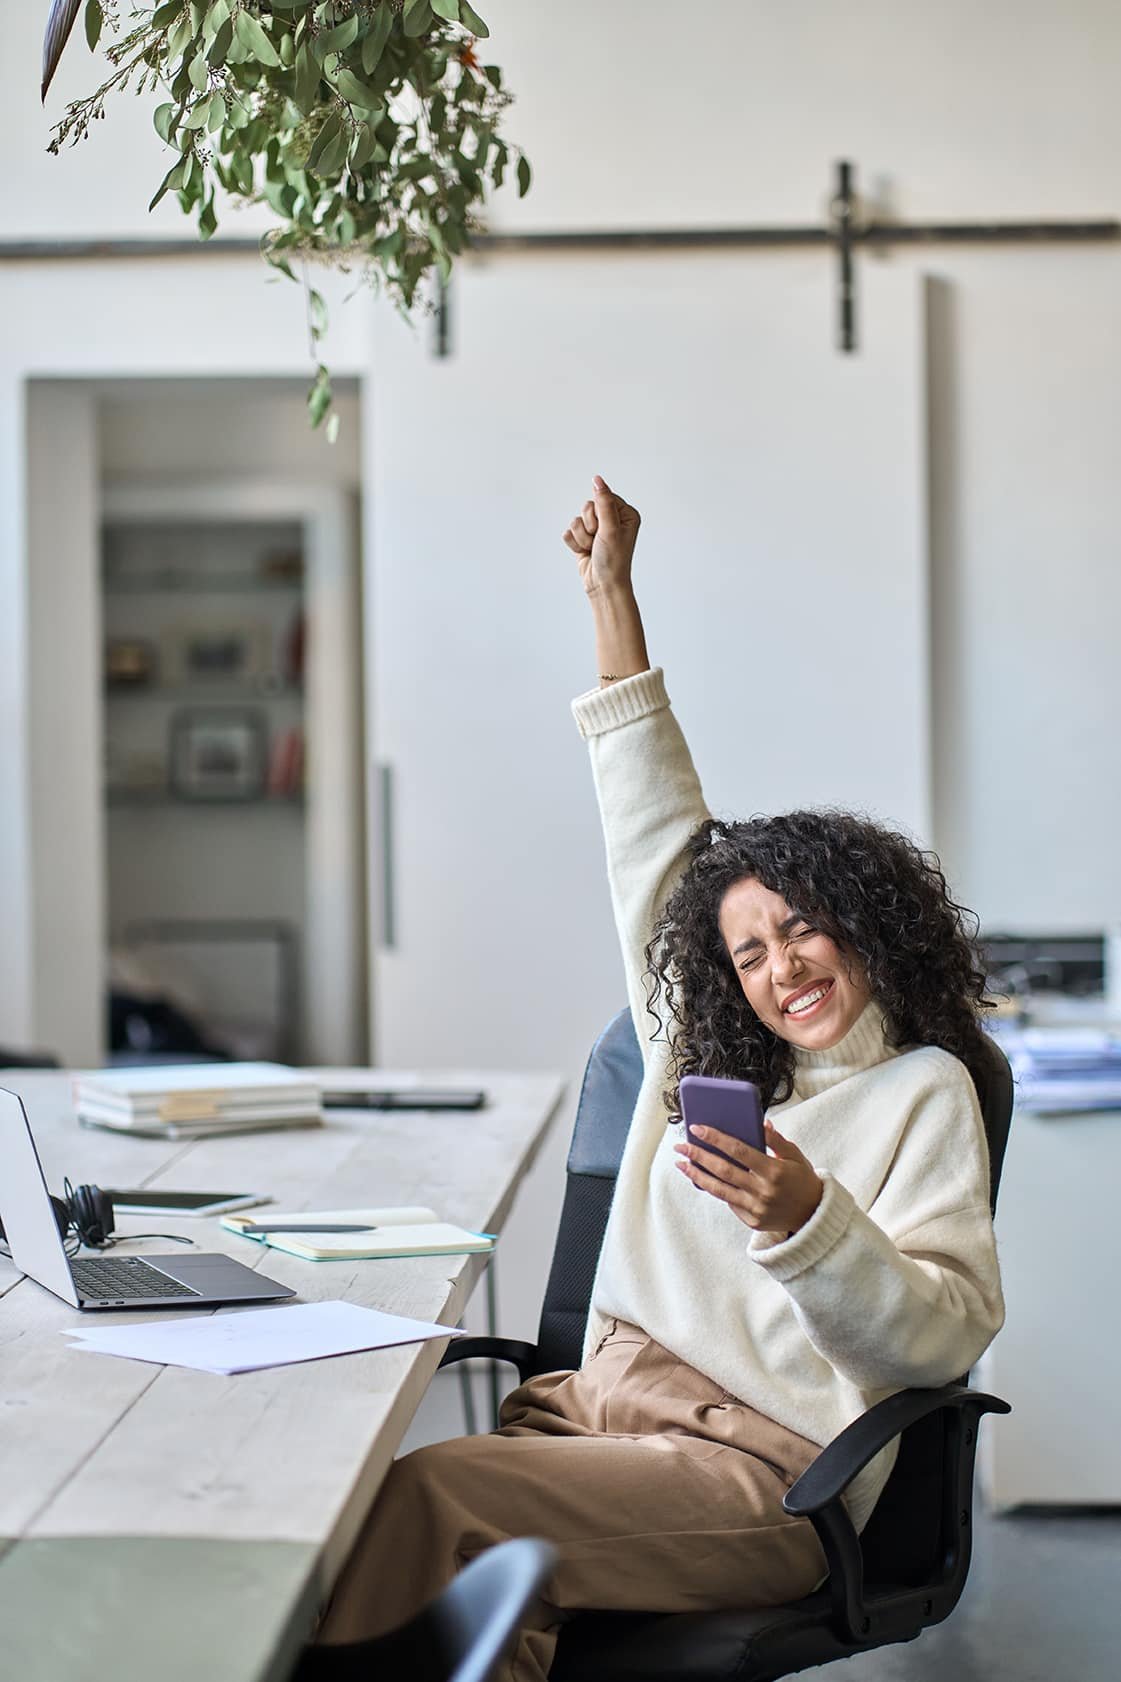 A joyful woman with curly hair stretches her arm up while holding a smartphone, sitting at an office desk surrounded by papers addressing top WordPress issues.